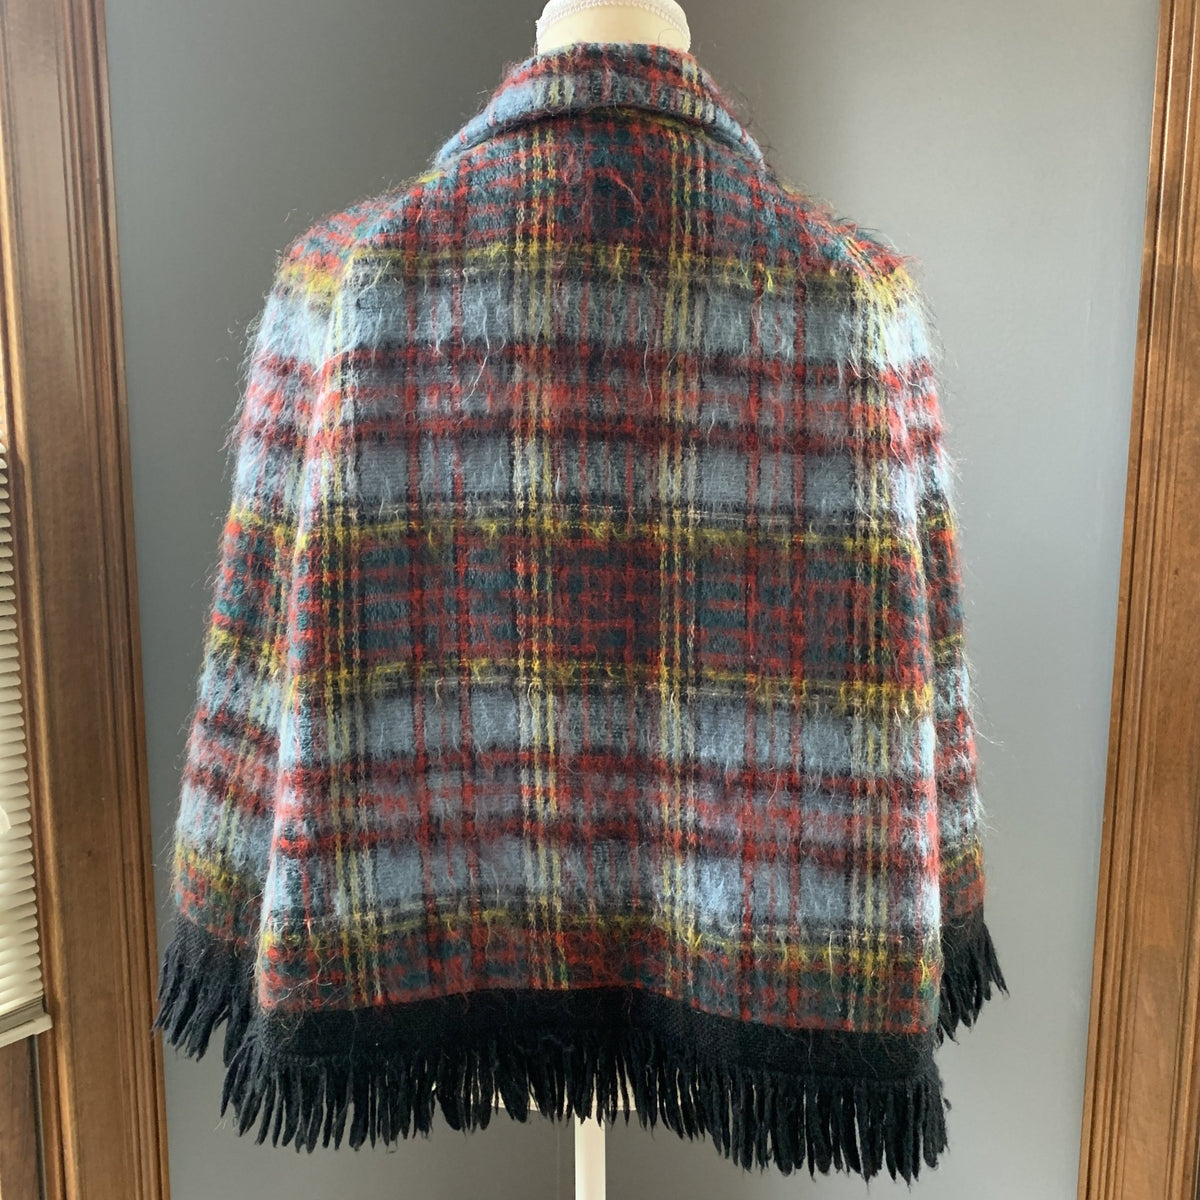 Vintage Mohair Wool Poncho or Jacket in Blue and Red Plaid from ...